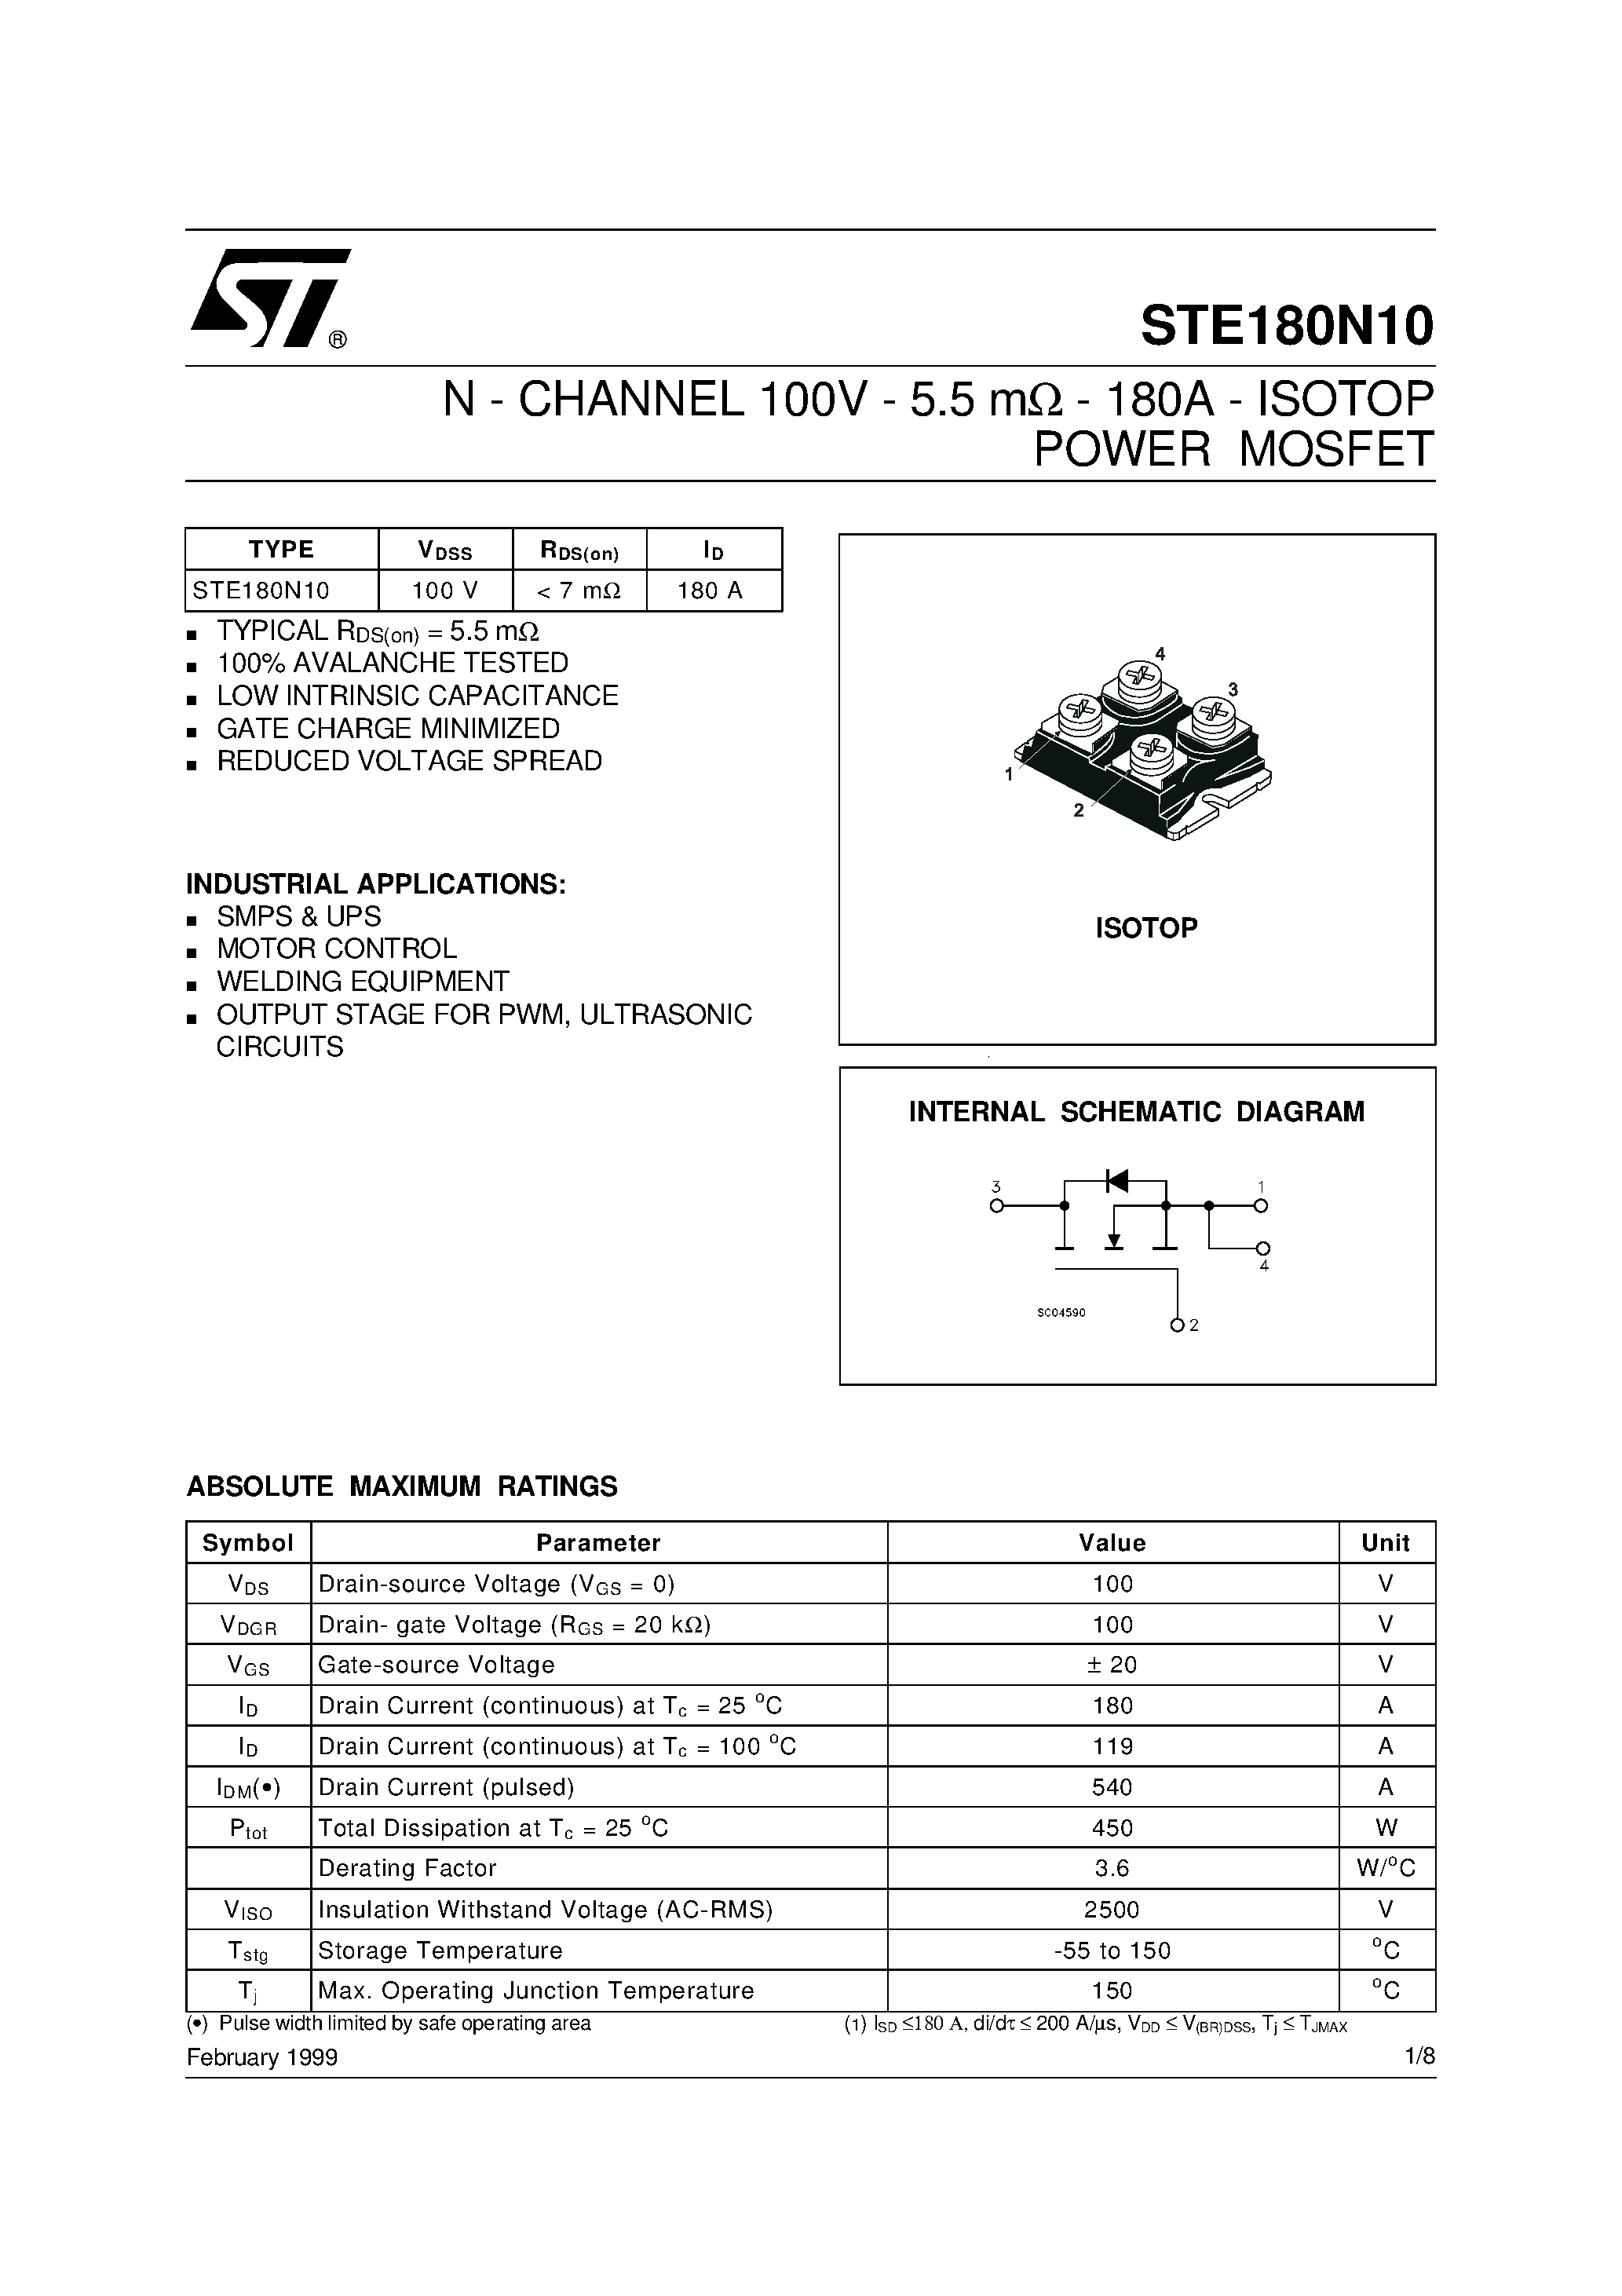 Даташит STE180N10 - N - CHANNEL 100V - 5.5 mohm - 180A - ISOTOP POWER MOSFET страница 1